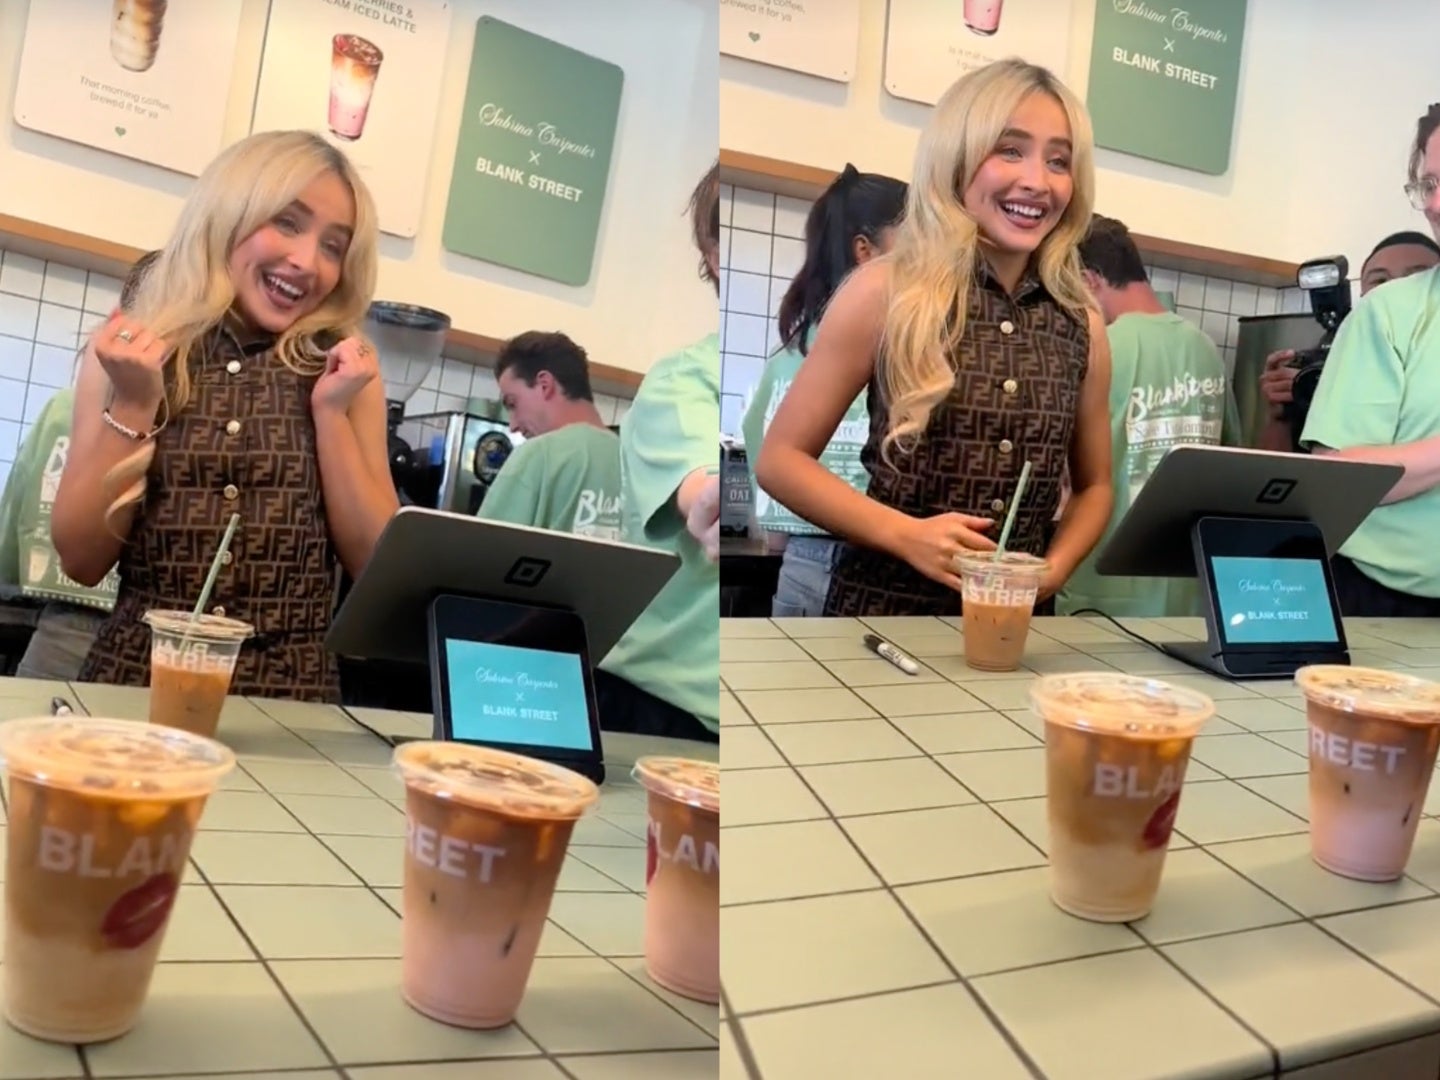 Sabrina Carpenter receives backlash after working as a barista to promote song ‘Espresso’